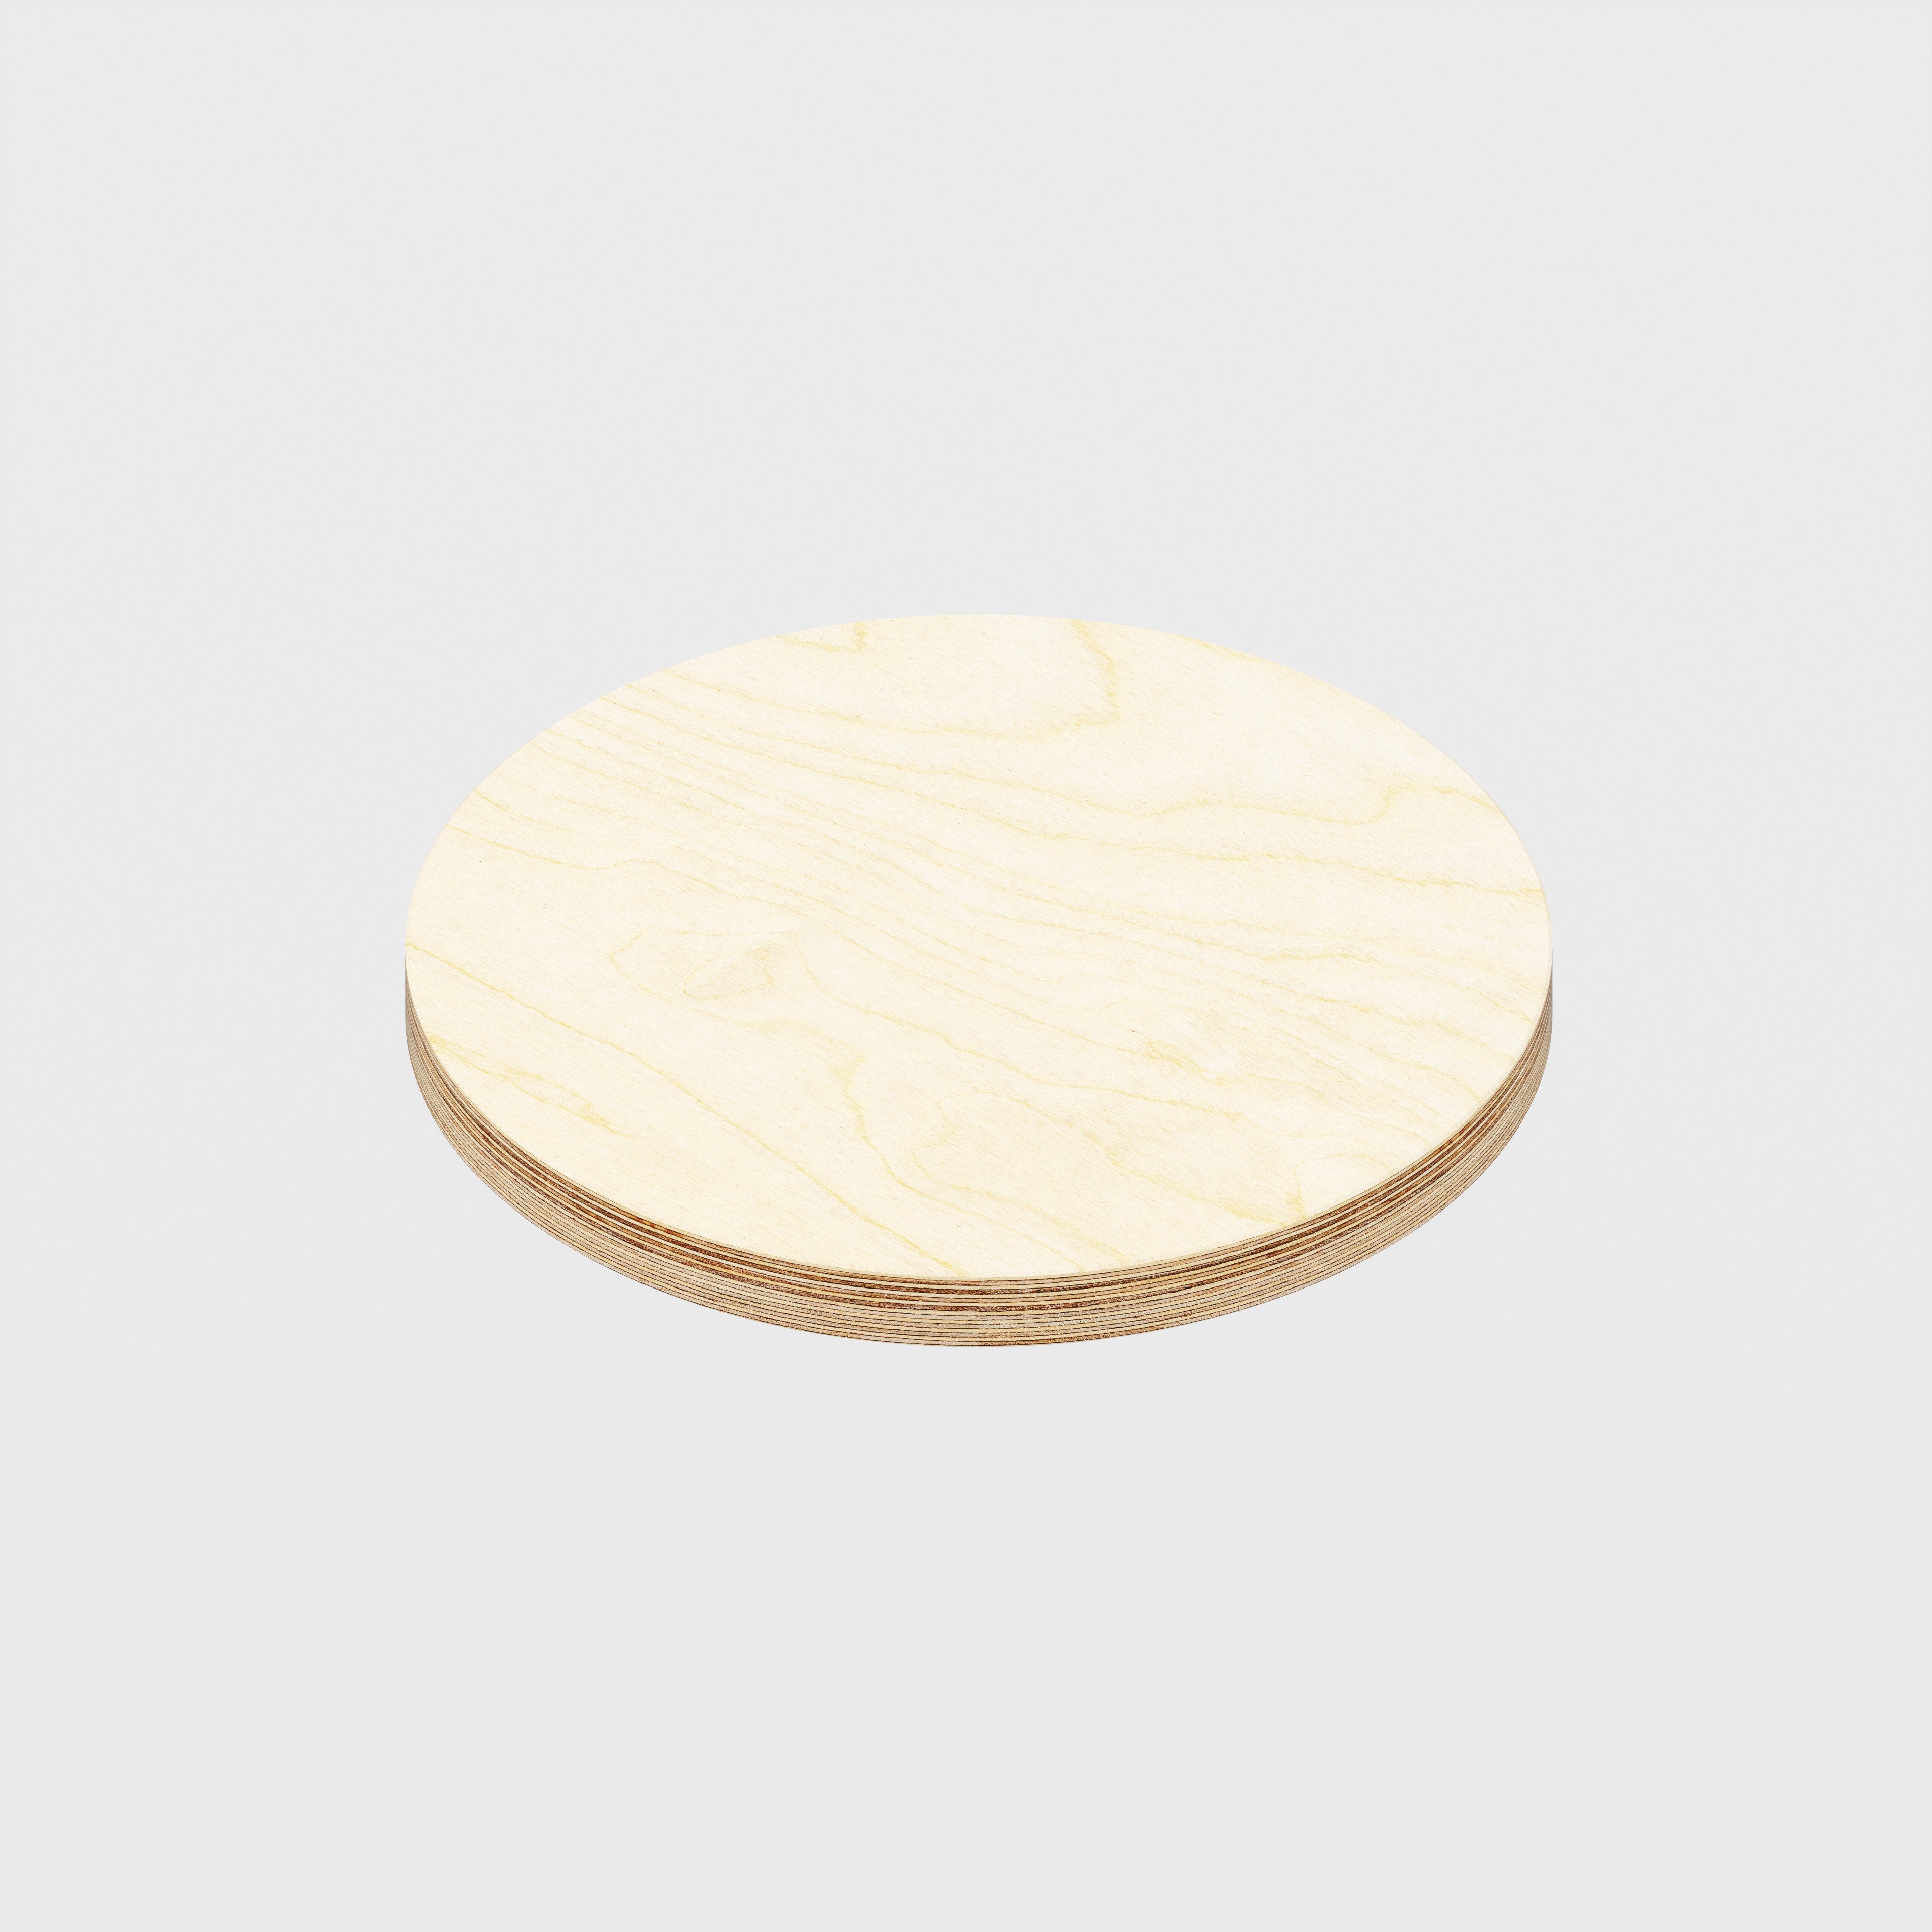 Plywood Stooltop - Plywood Birch - 24mm